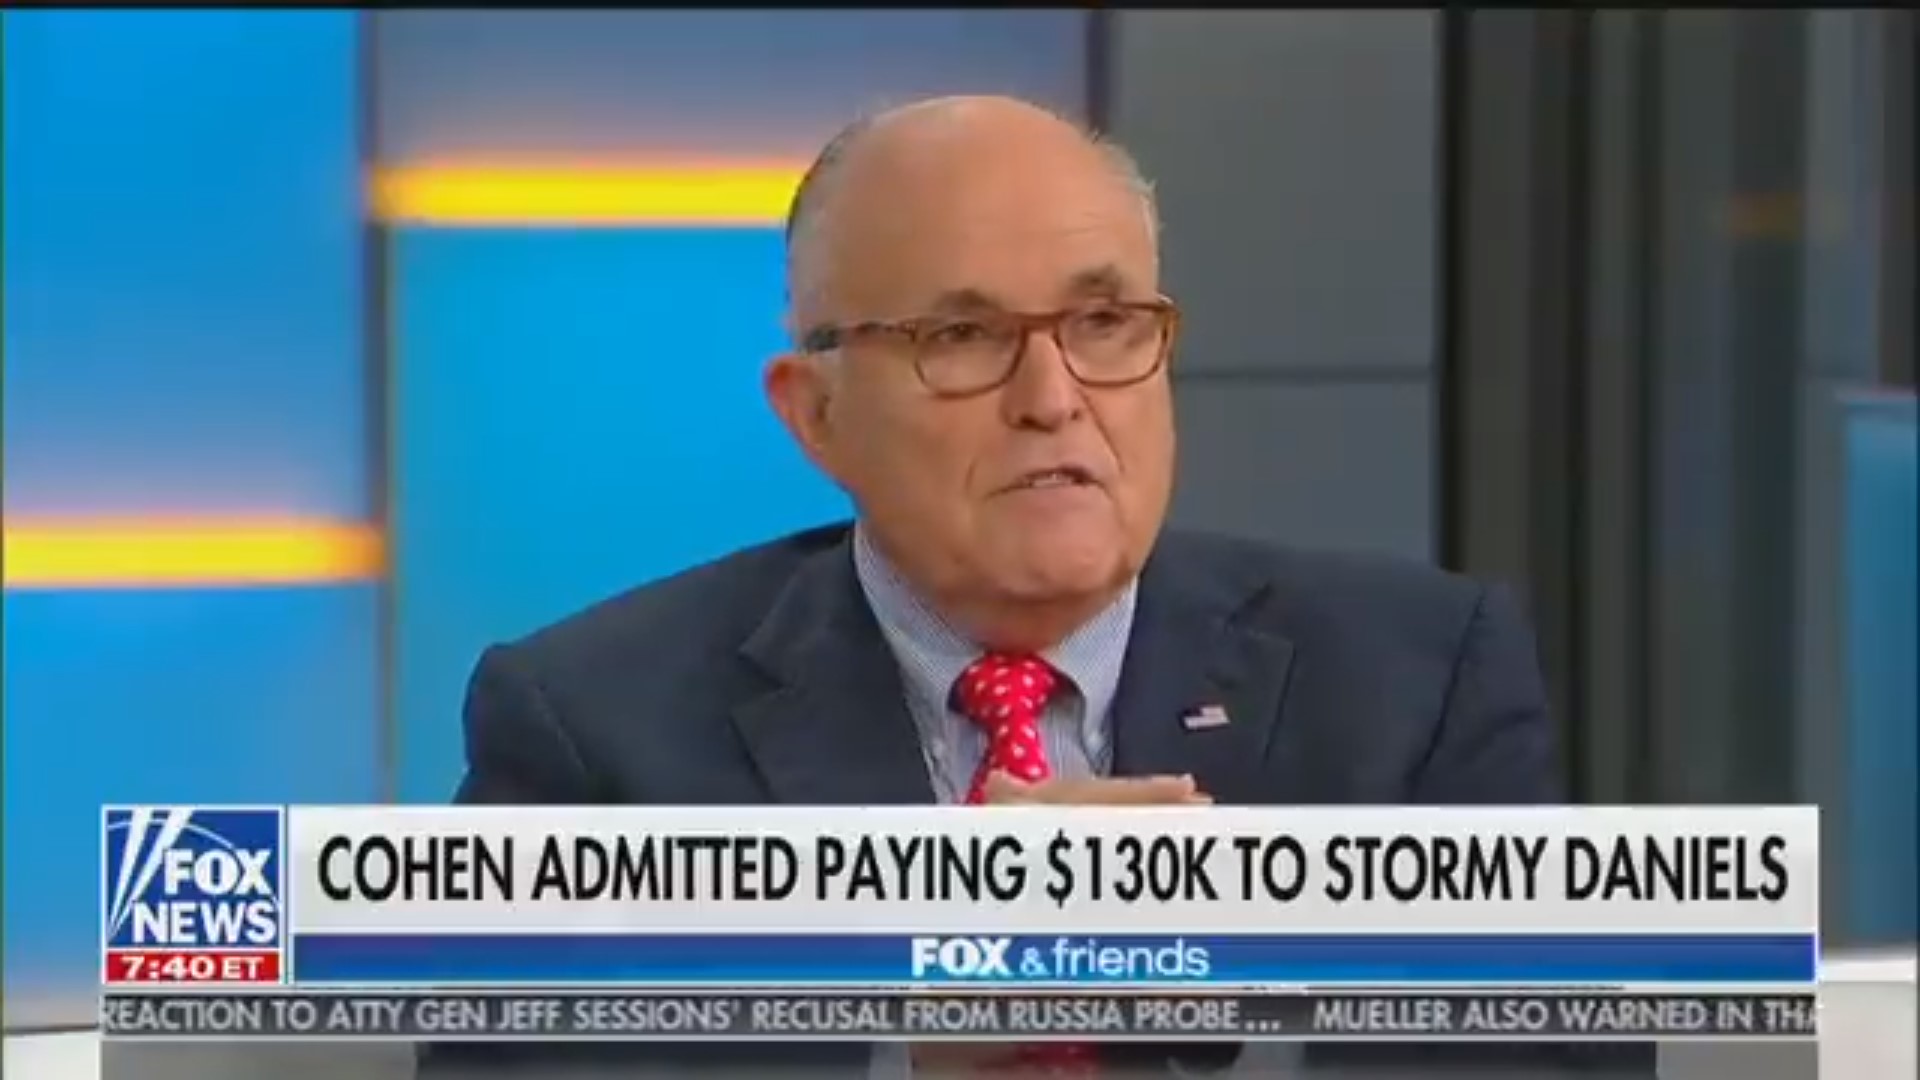 Giuliani Links Stormy Payoff To 2016 Election: ‘Imagine If That Came Out’ During Last Debate With Hillary